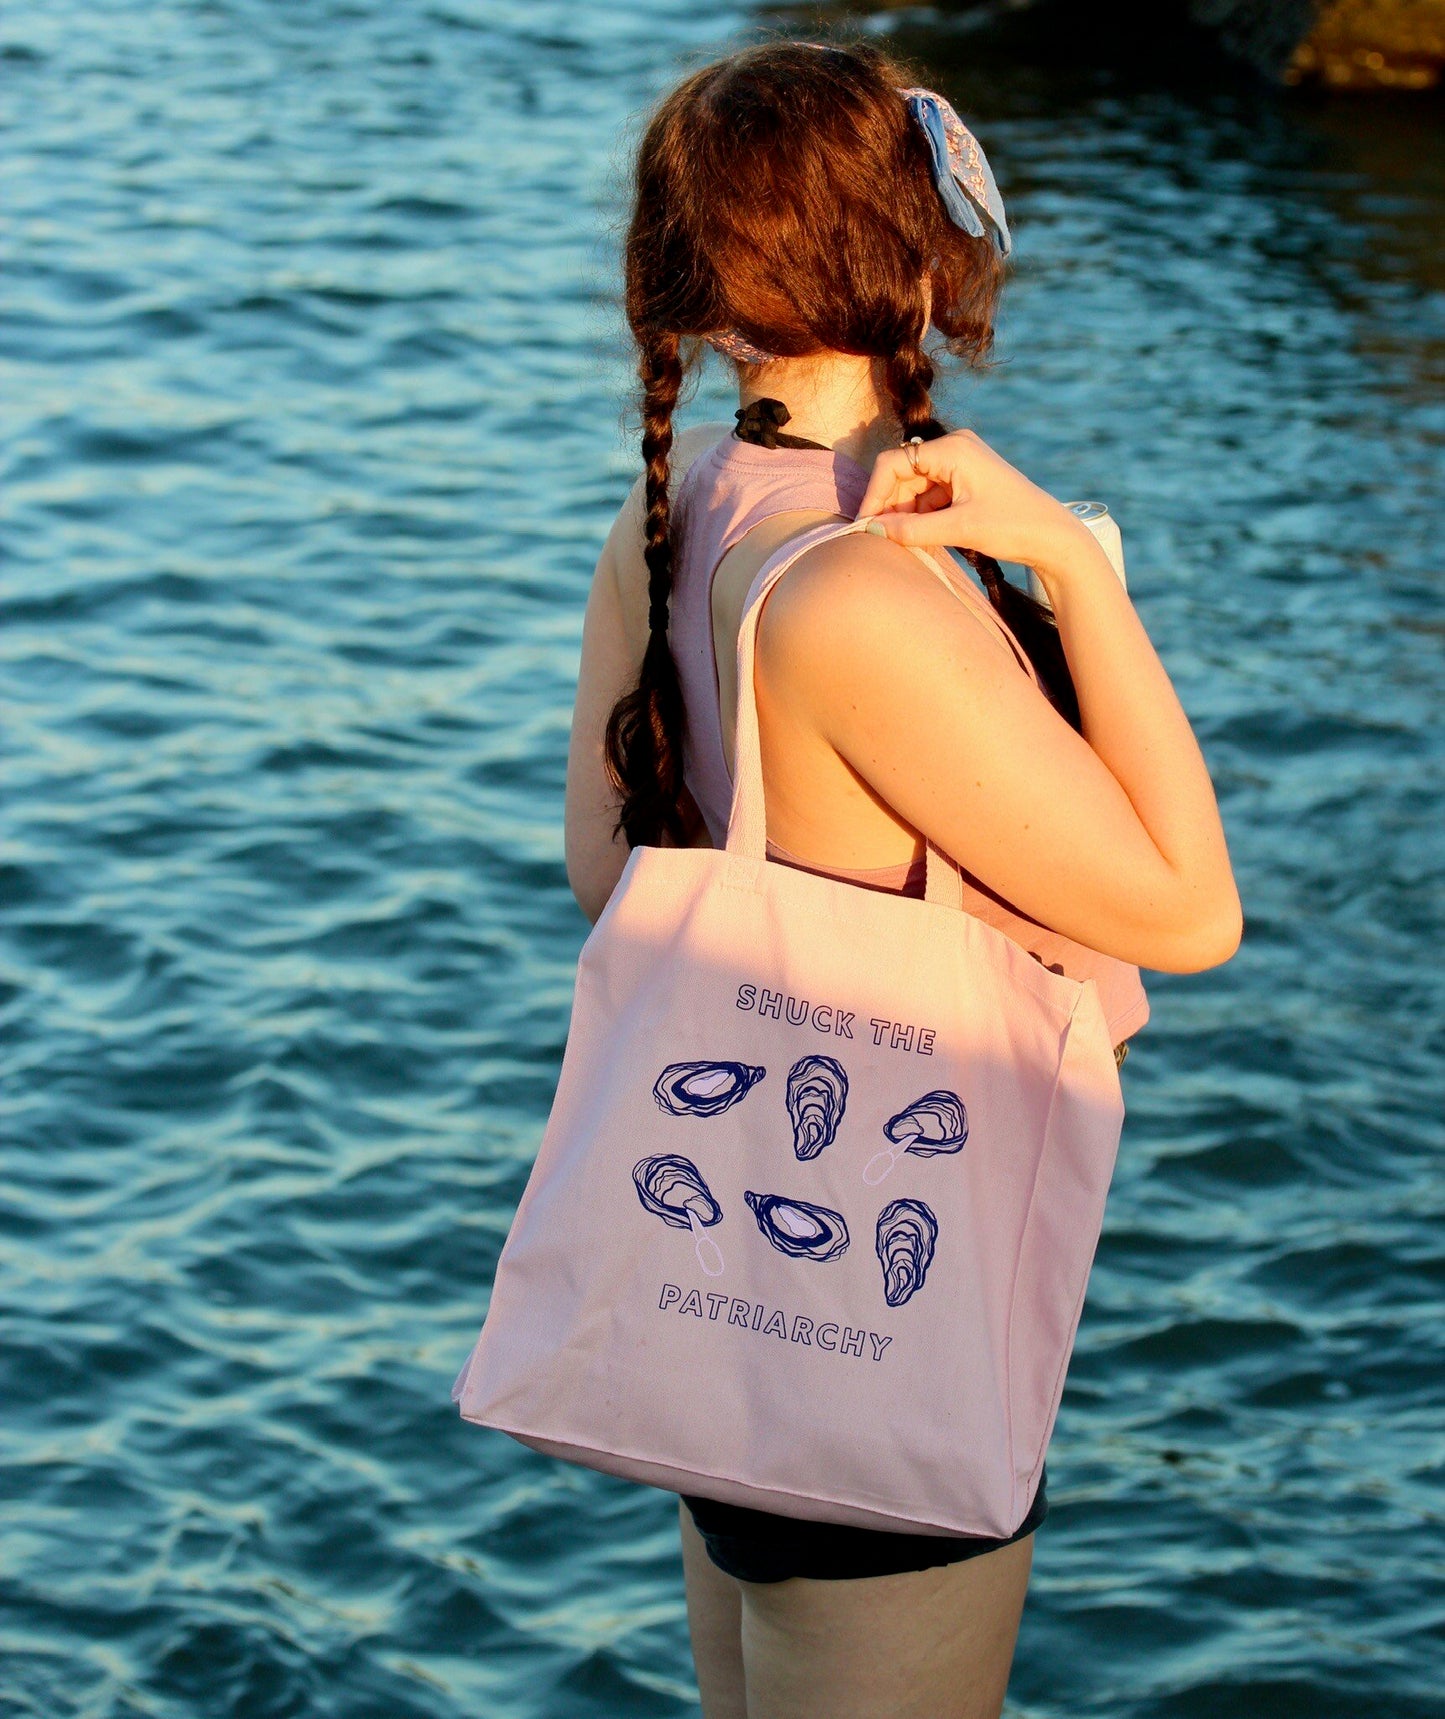 A woman wears a pink canvas tote that reads "Shuck the Patriarchy" at the beach